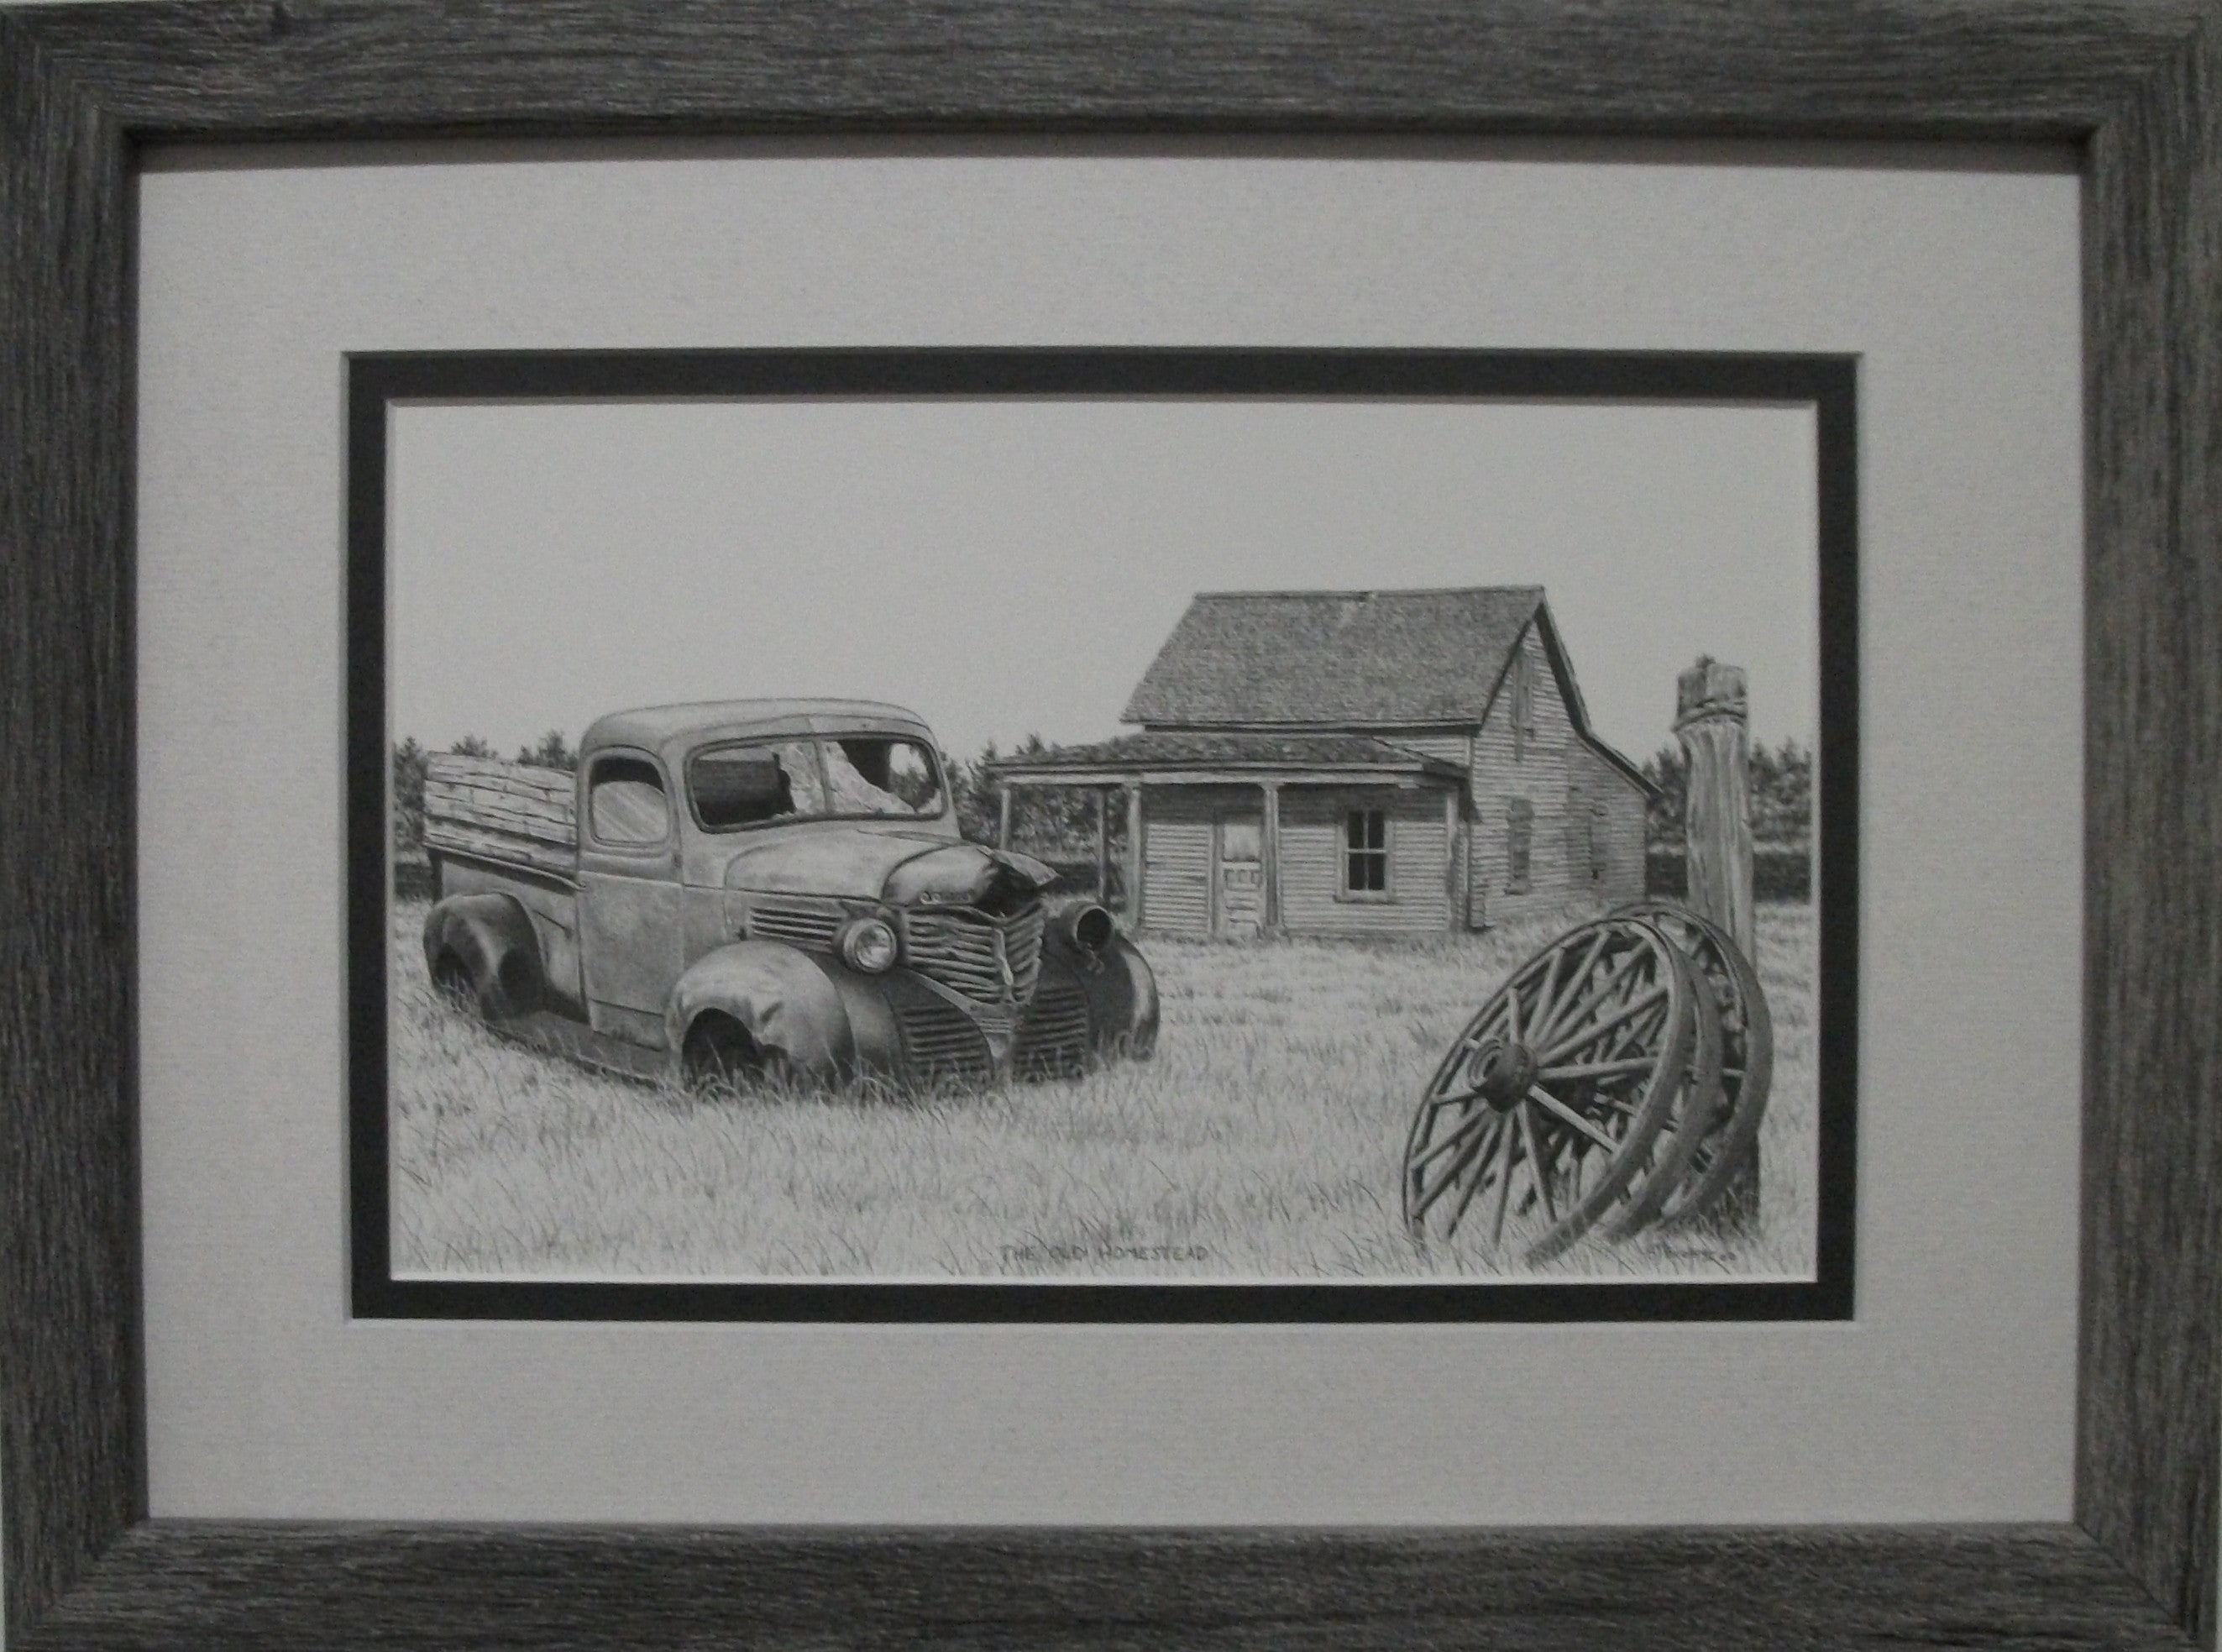 The Old Homestead by Bernie Brown